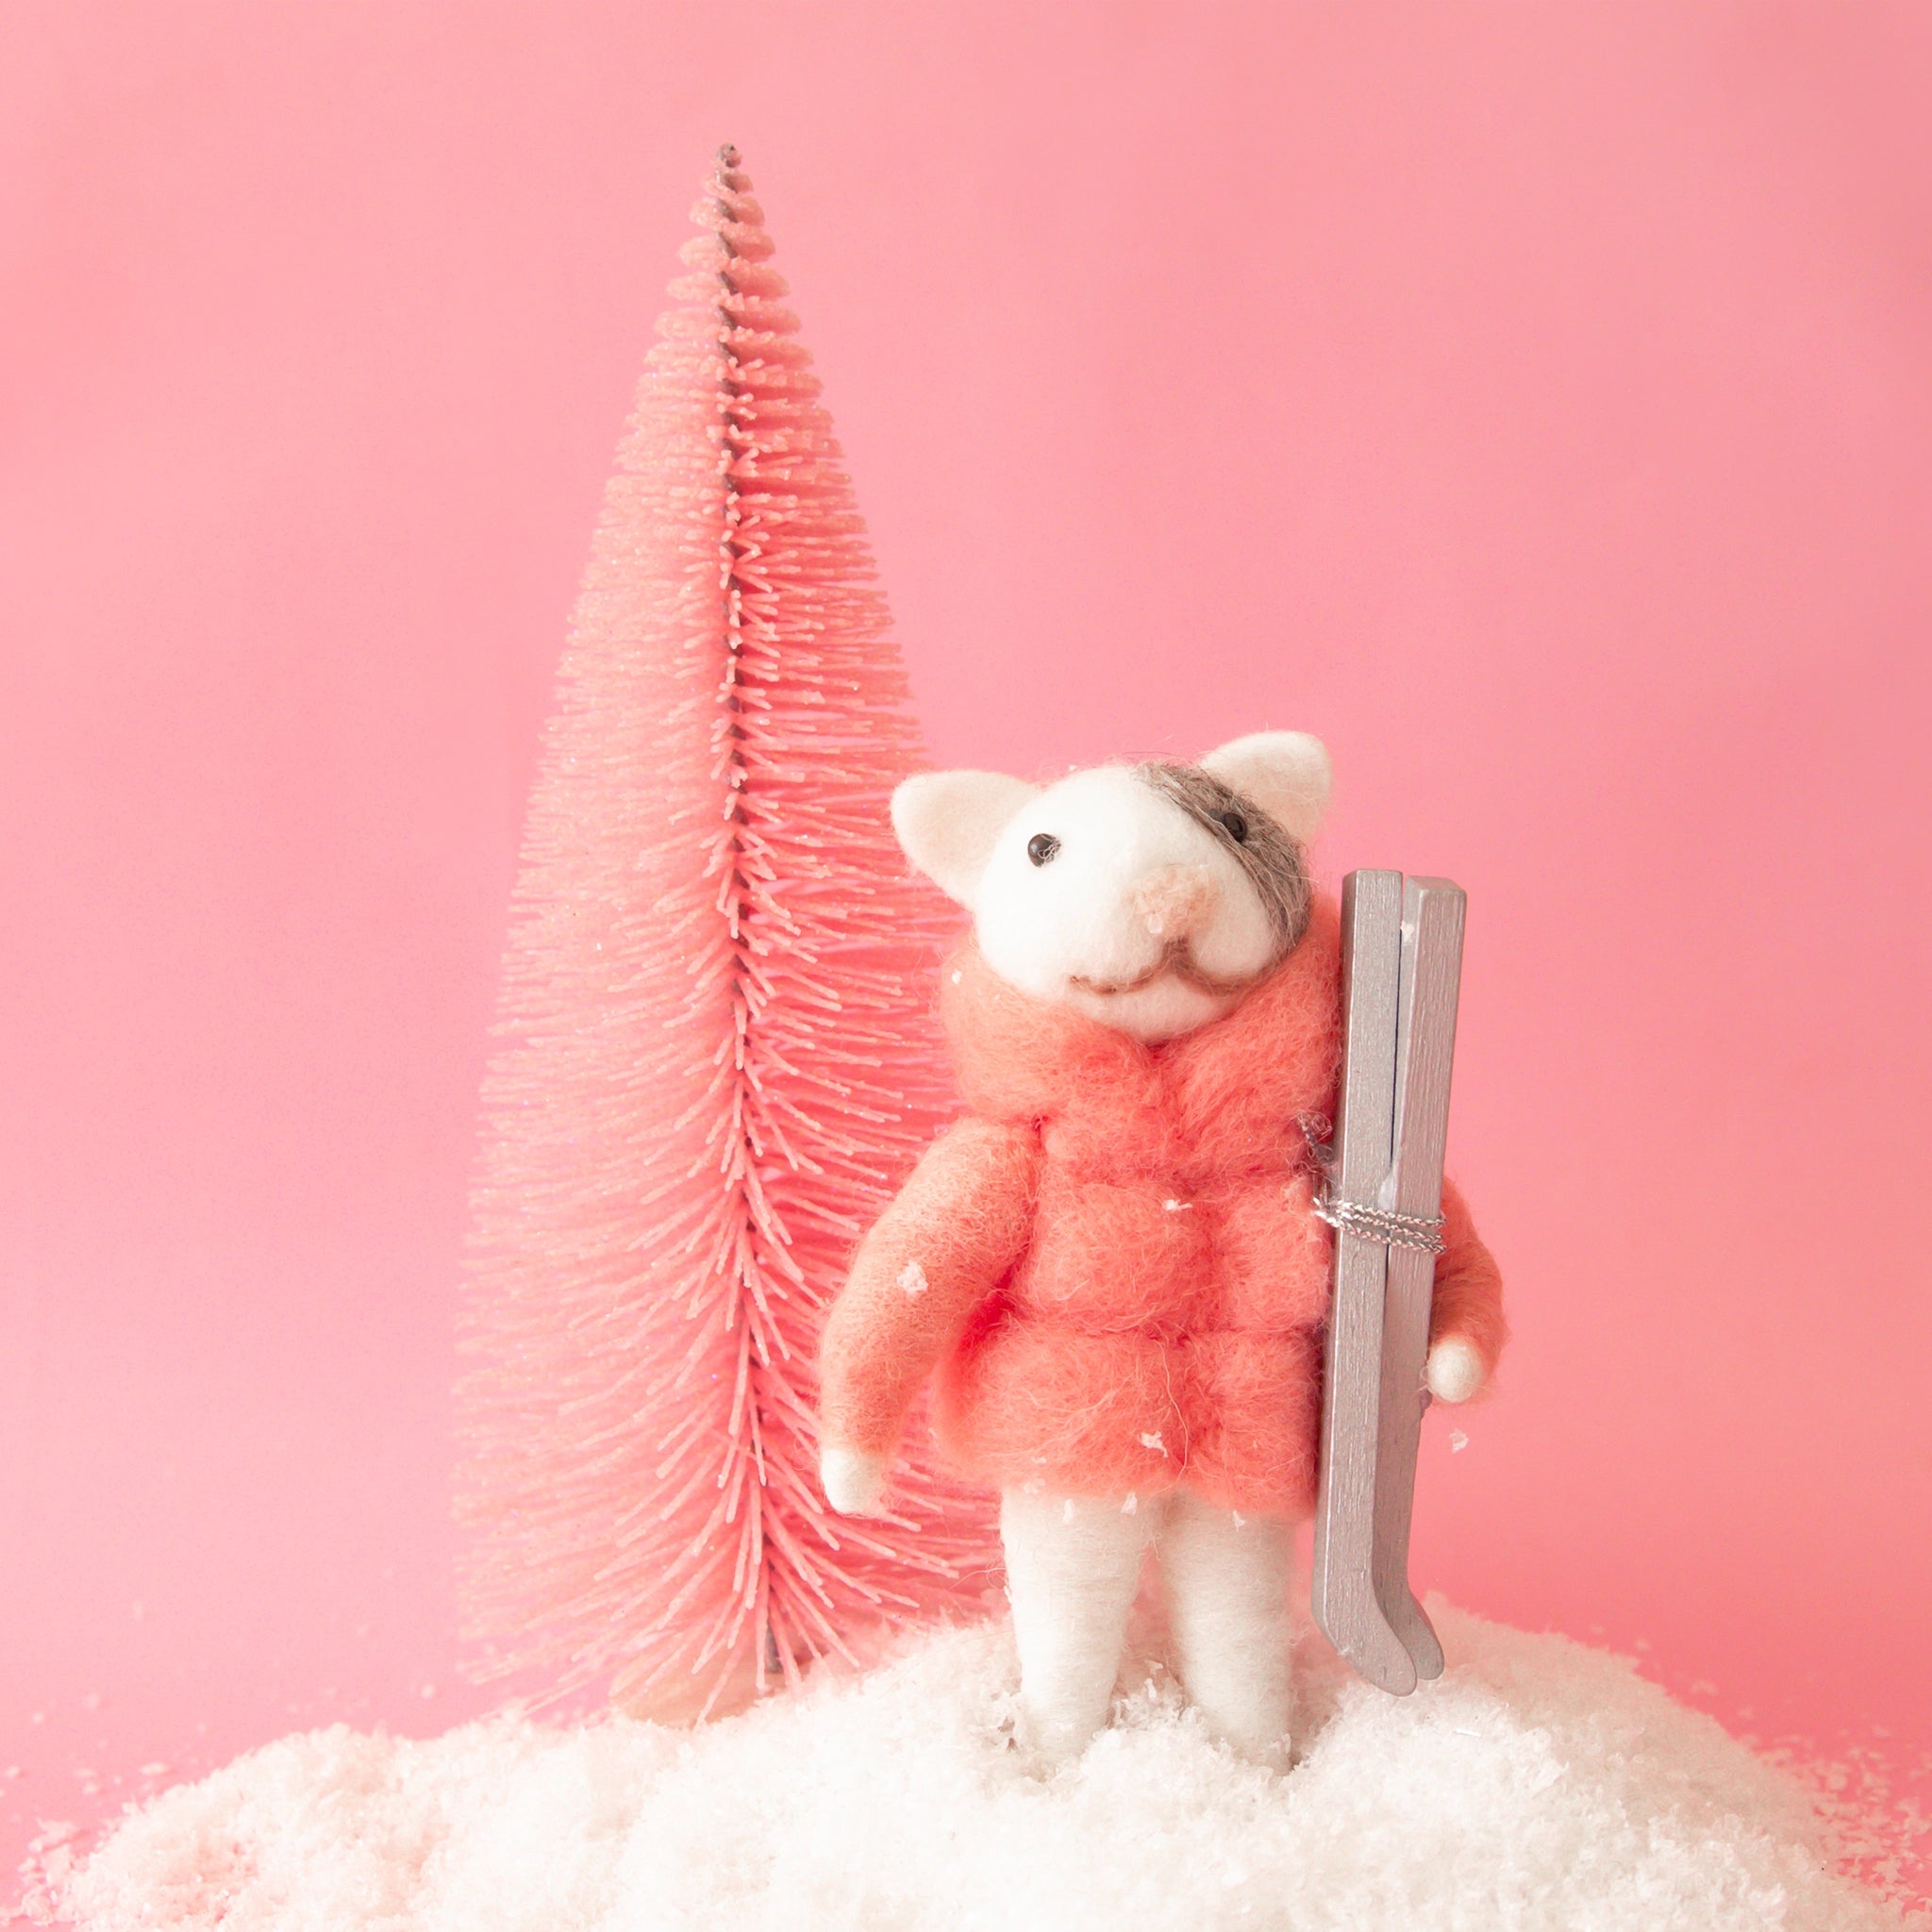 On a pink background with a pink bristle brush tree is a white and grey felt cat ornament wearing a pink puffy jacket and holding a pair of silver skis. 